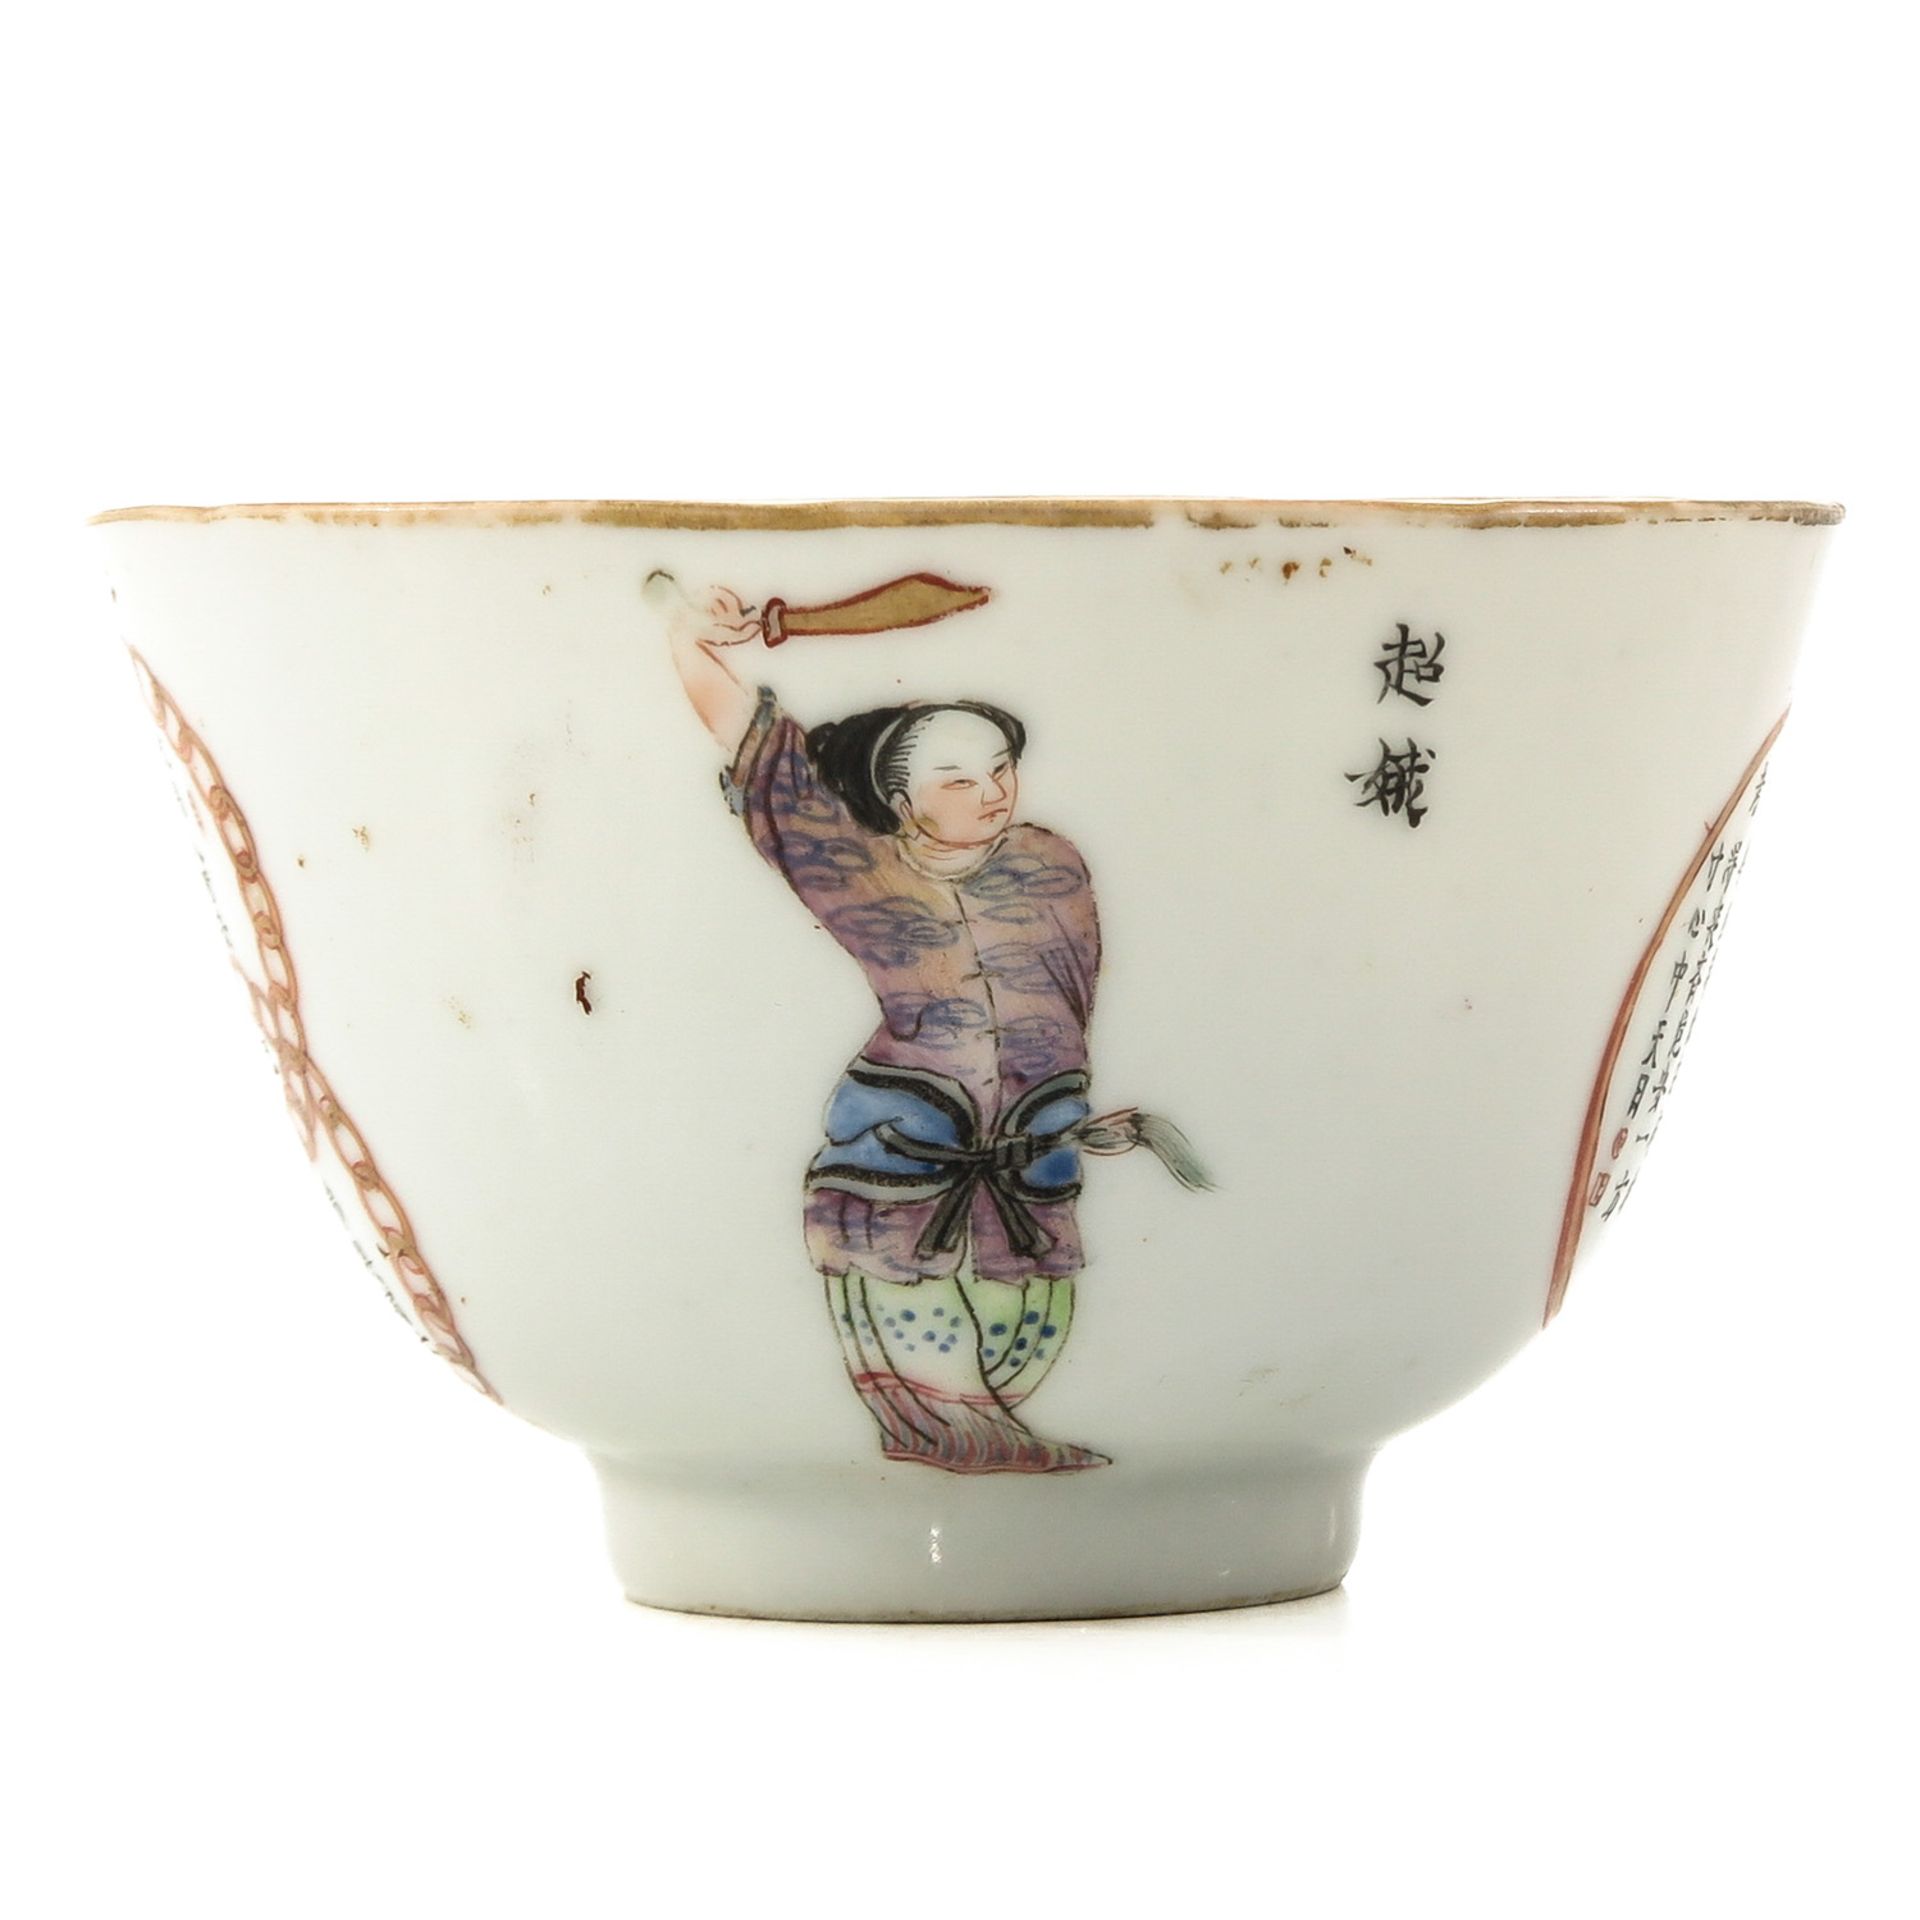 A Wu Shuang Pu Decor Cup and Saucer - Image 3 of 9